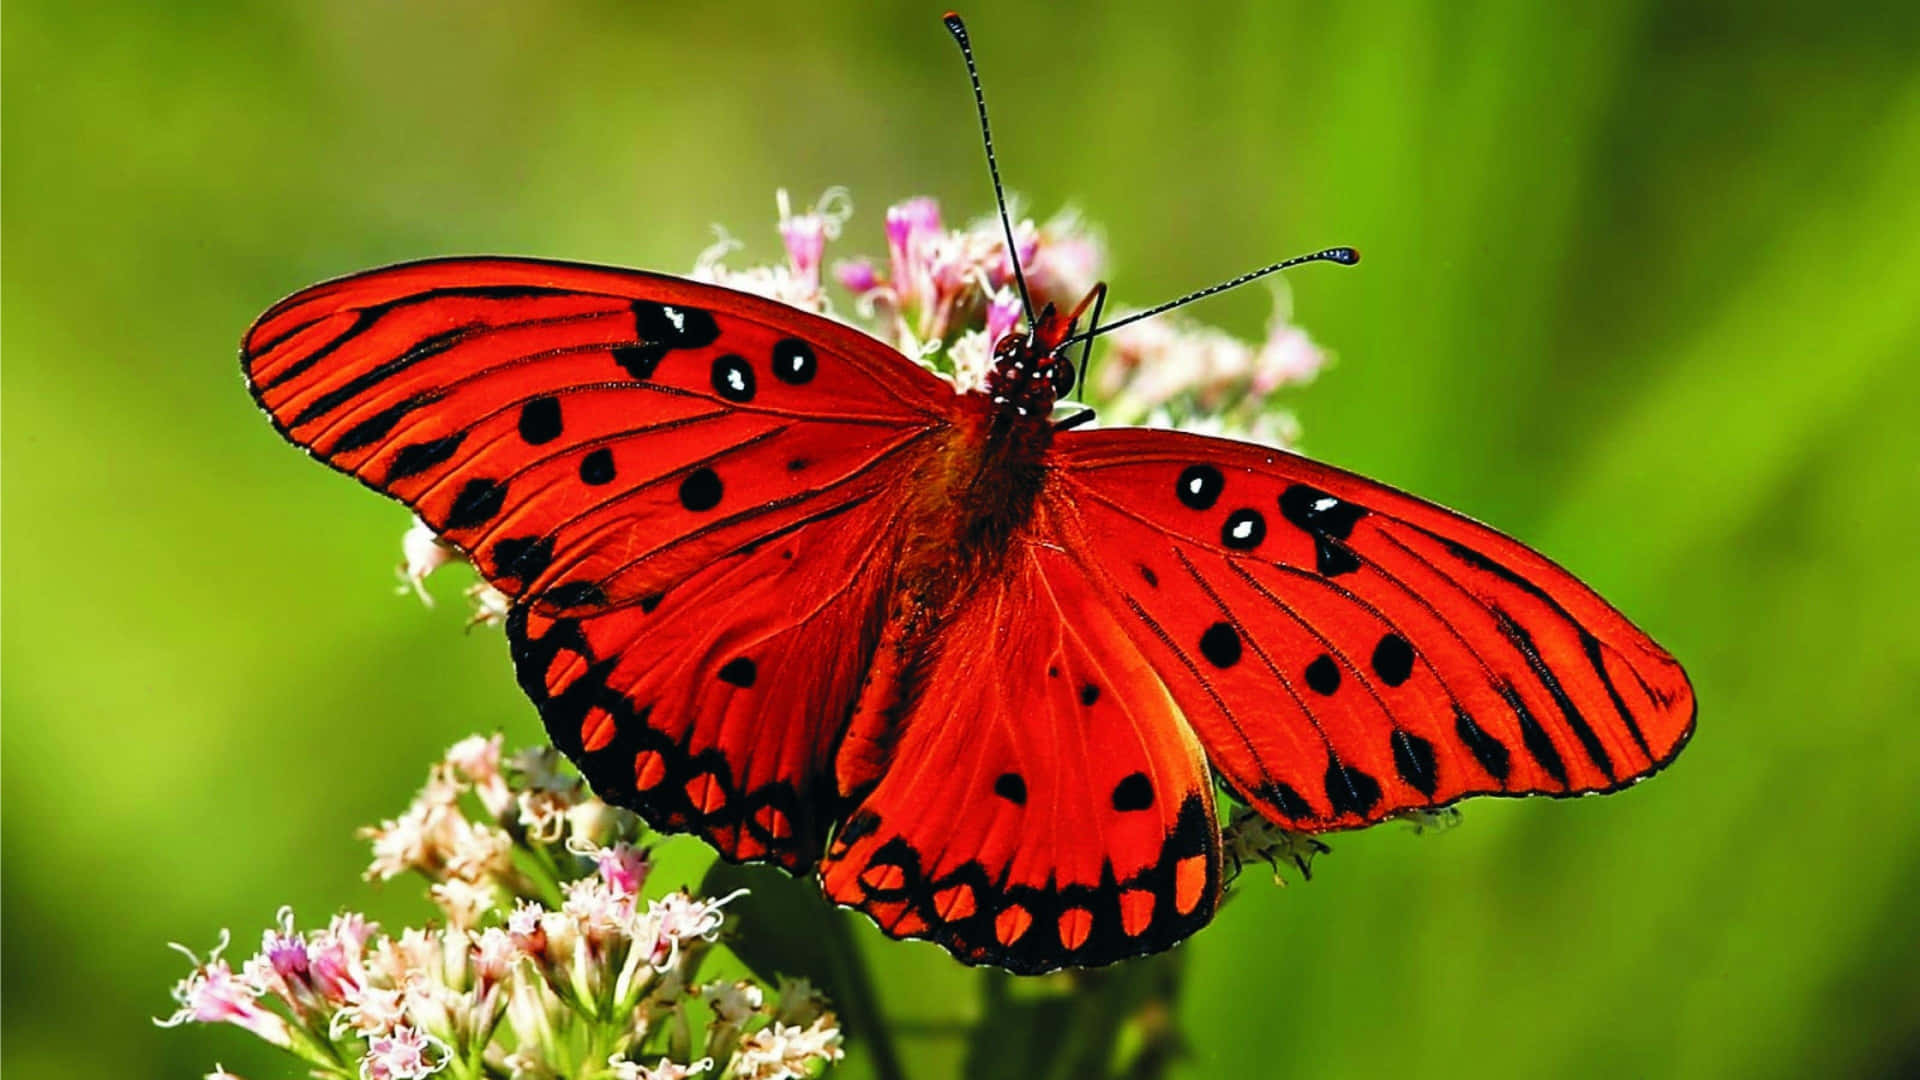 Close-up of a Vibrant Butterfly Wallpaper